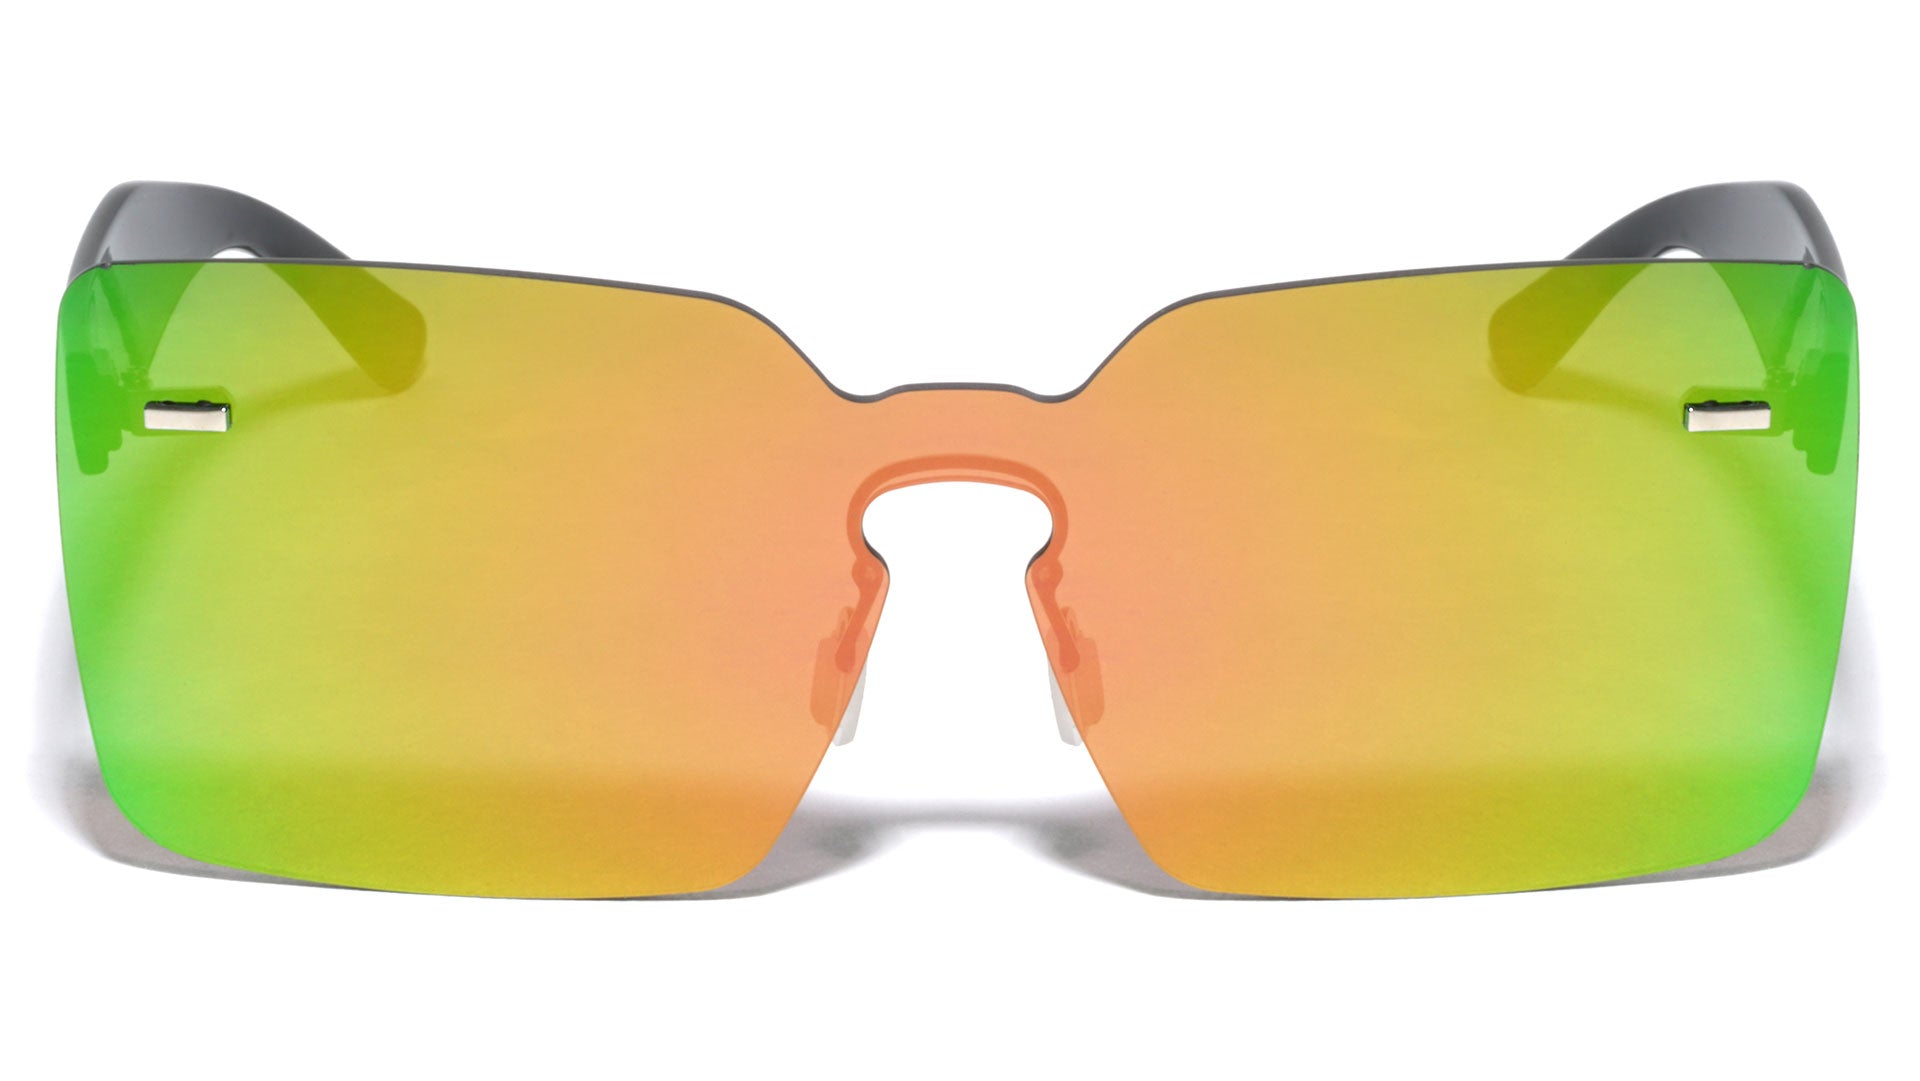 Kd's Sunglasses Colored Mirror Lens - vipcycle motorcycle parts